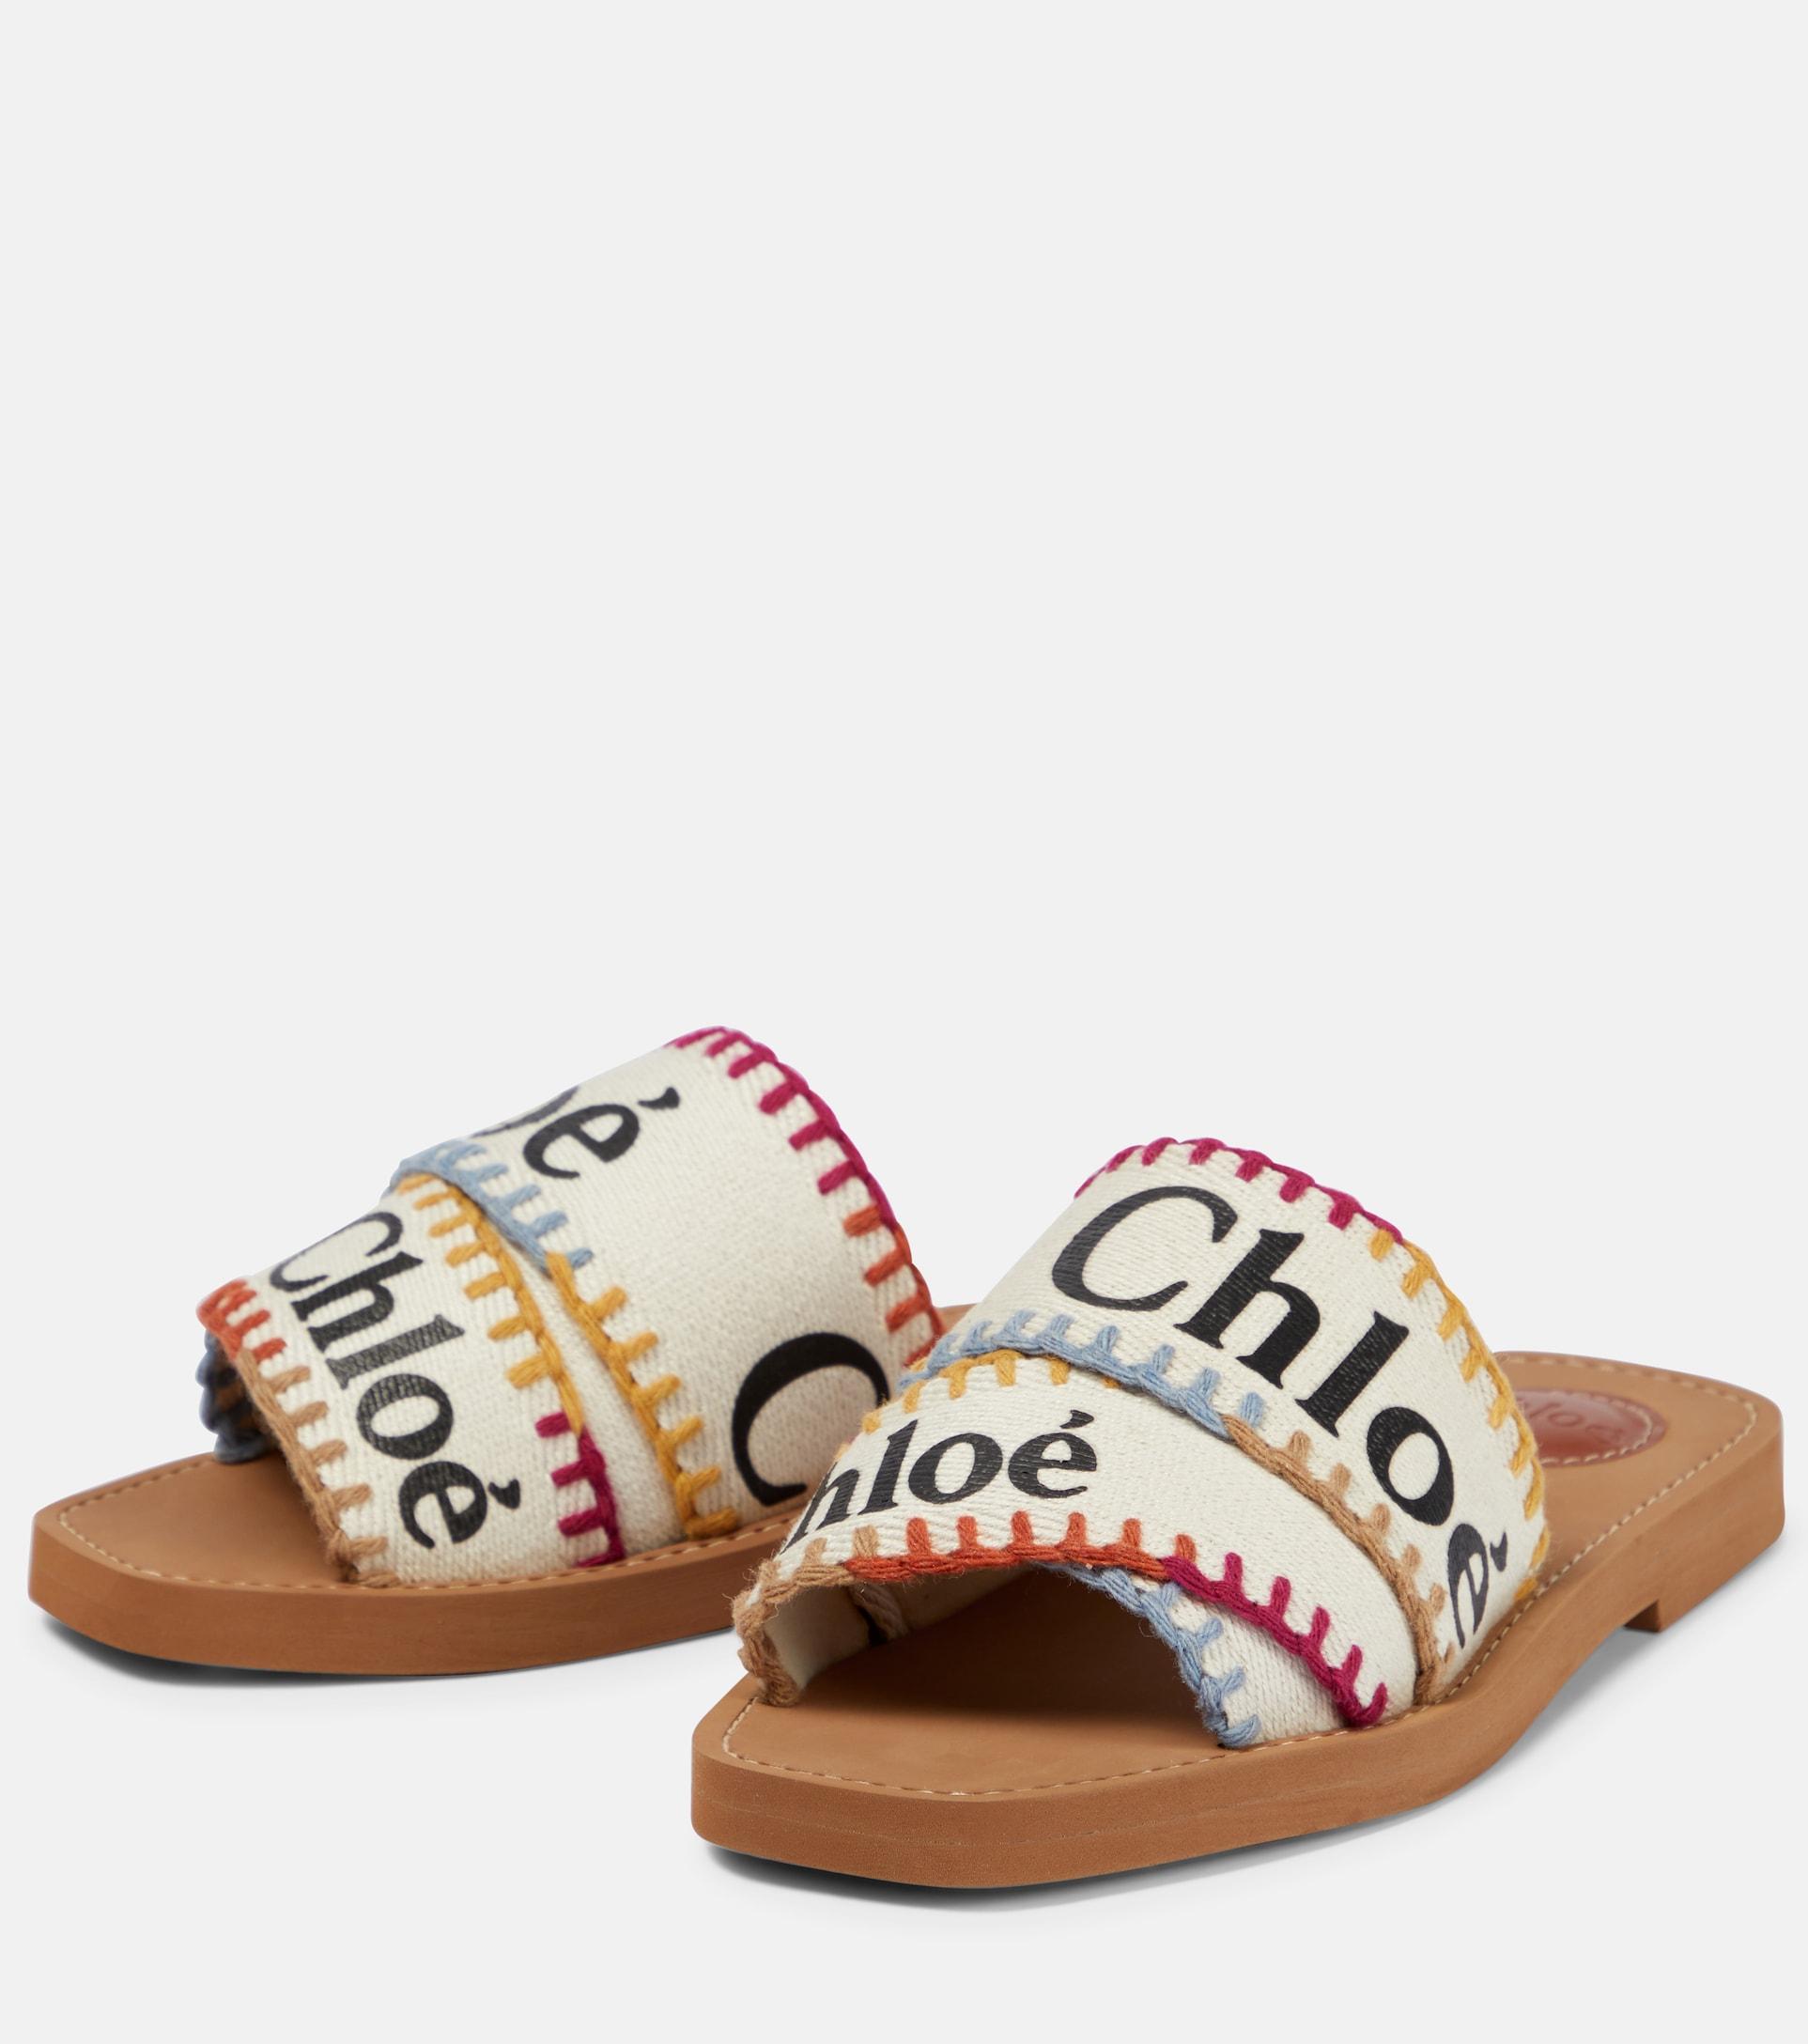 Chloé Chloe Woody Topstitched Flat Sandals in Brown | Lyst